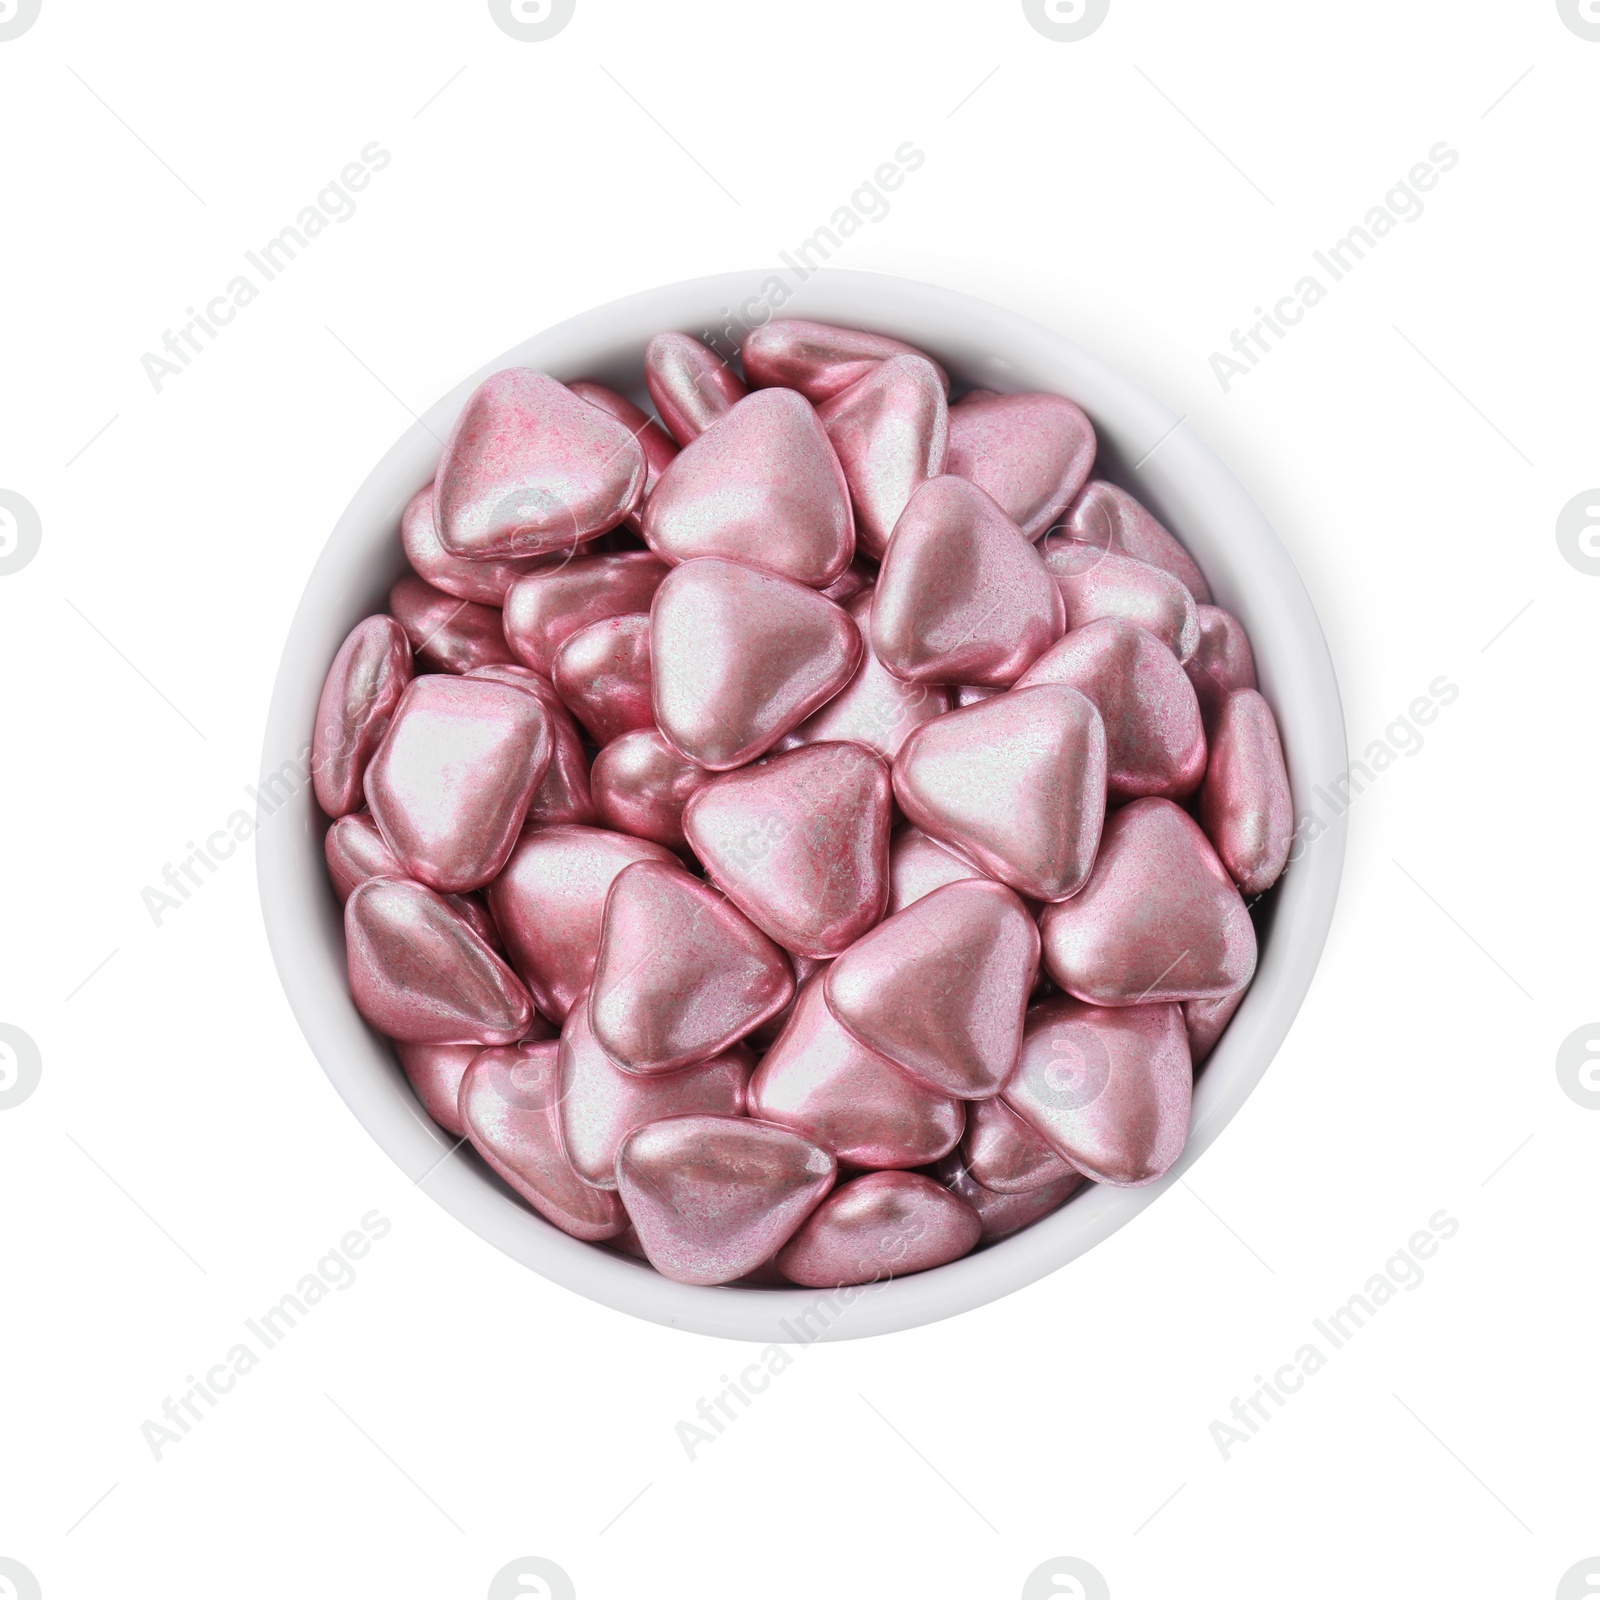 Photo of Bowl with delicious heart shaped candies on white background, top view